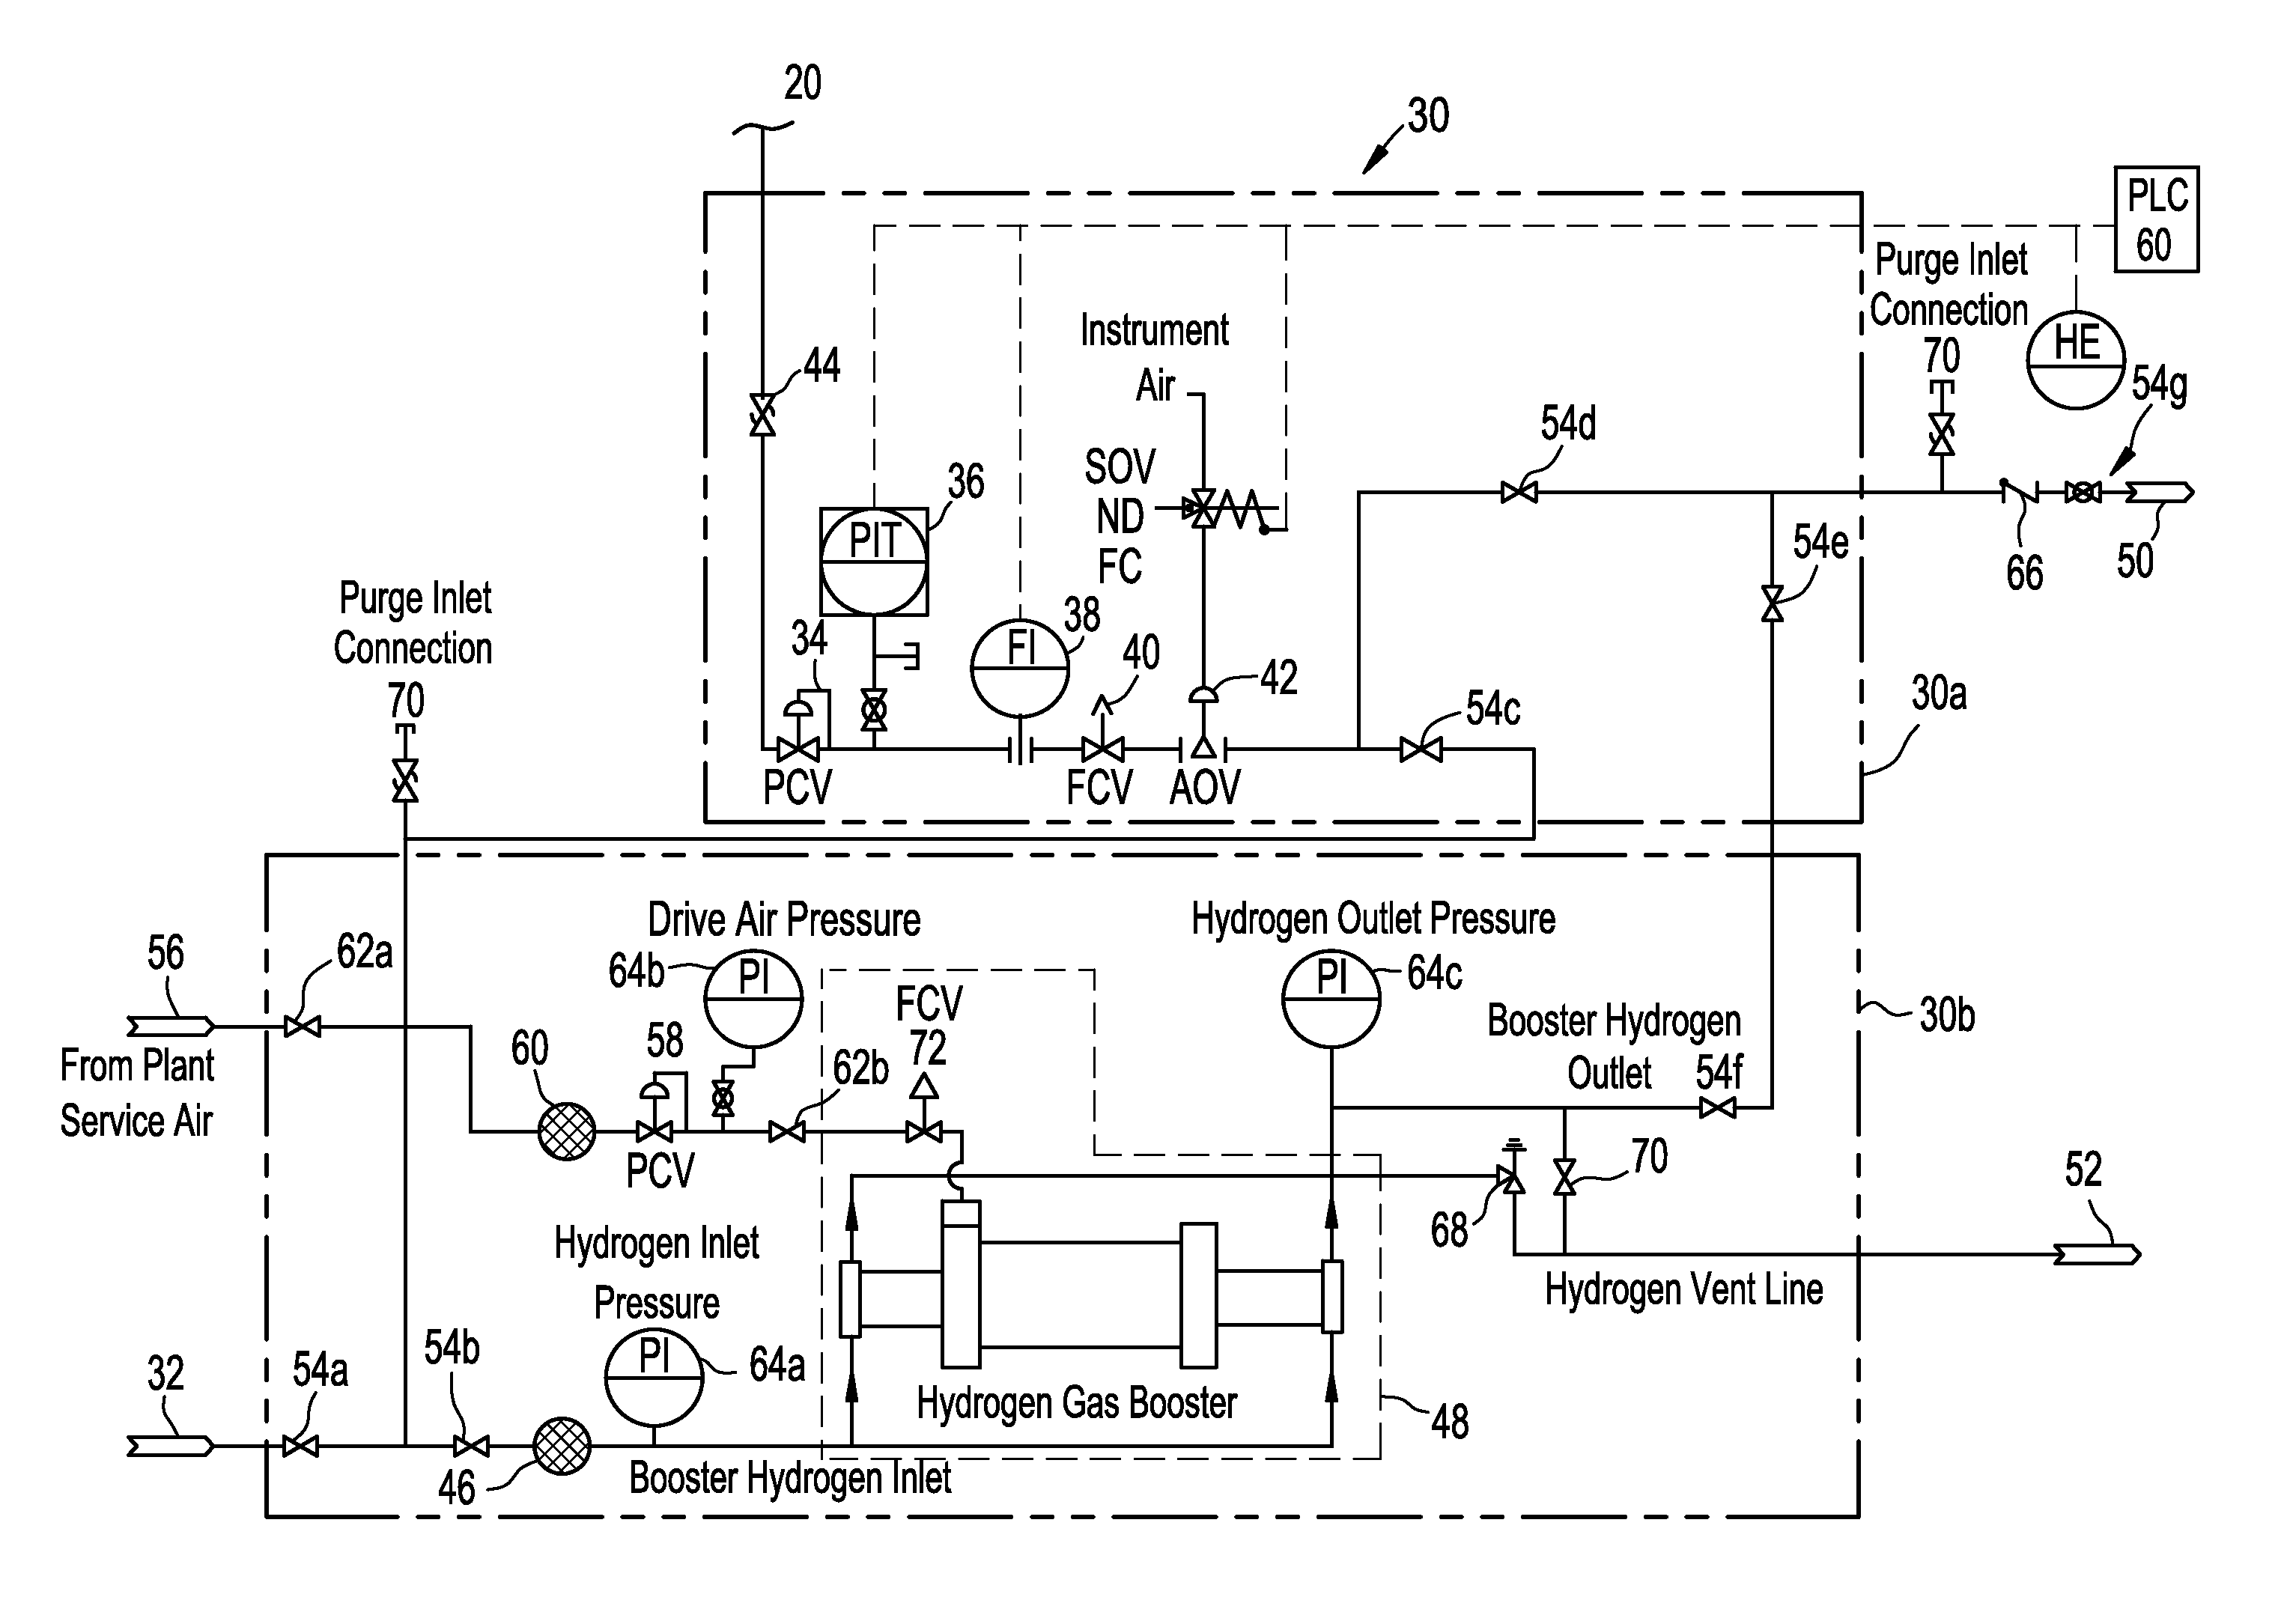 Startup/shutdown hydrogen injection system for boiling water reactors (BWRS), and method thereof